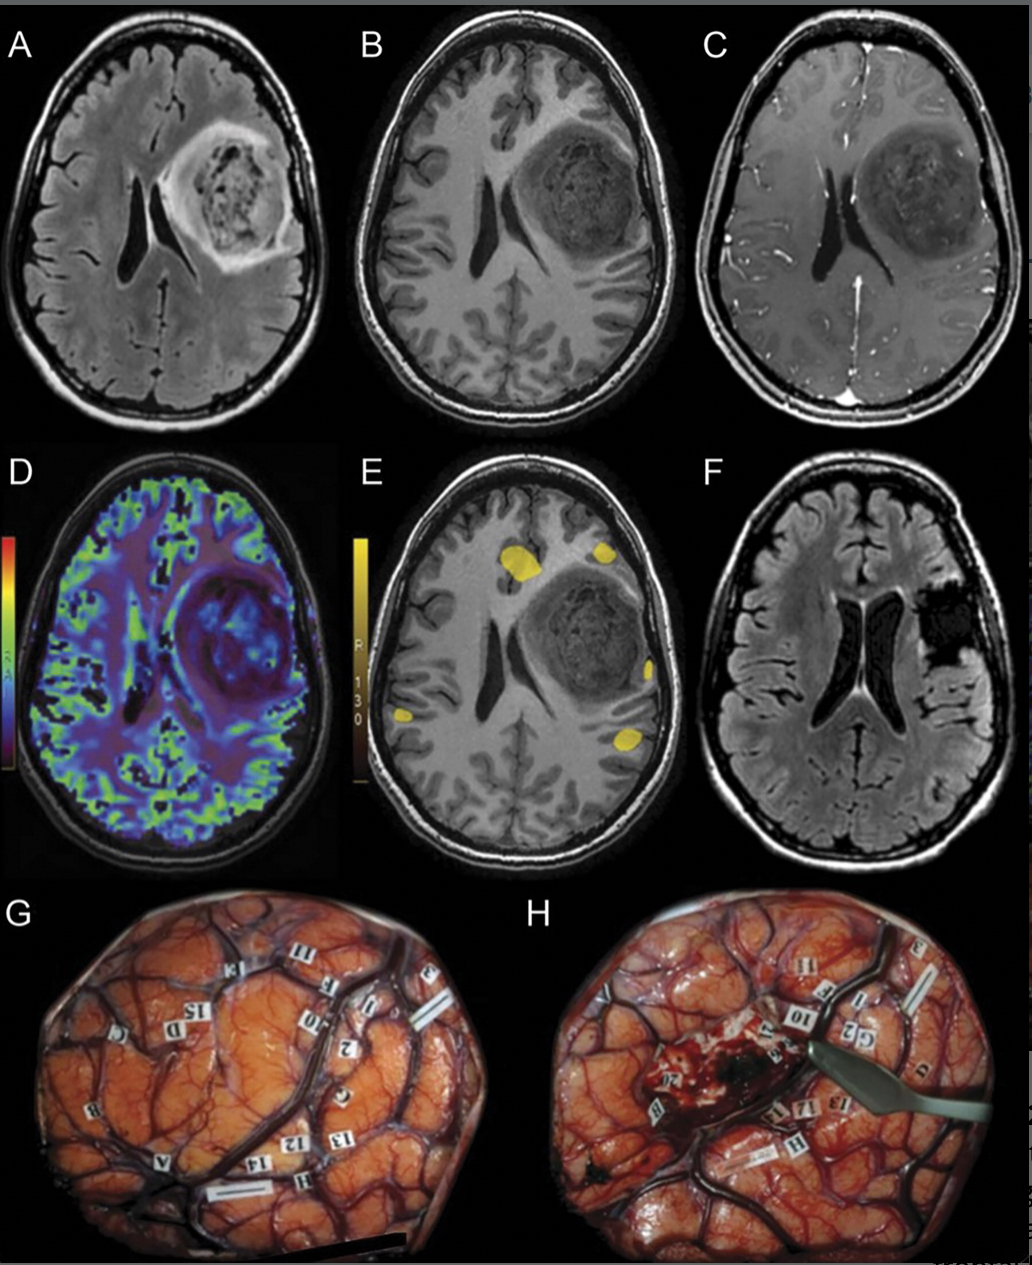 MRI scans and direct cortical stimulation technique in a 32-year-old woman with a grade II astrocytoma. Preoperative MRI shows a well-delineated mass within the left frontal lobe on, A, three-dimensional fluid-attenuated inversion recovery and, B, precontrast three-dimensional T1-weighted scan. C, Patchy and faint contrast enhancement is observed on postcontrast three-dimensional T1-weighted MRI scan. D, Cerebral blood volume map shows a globally hypoperfused tumor with hyperperfused foci.

Credit: RSNA